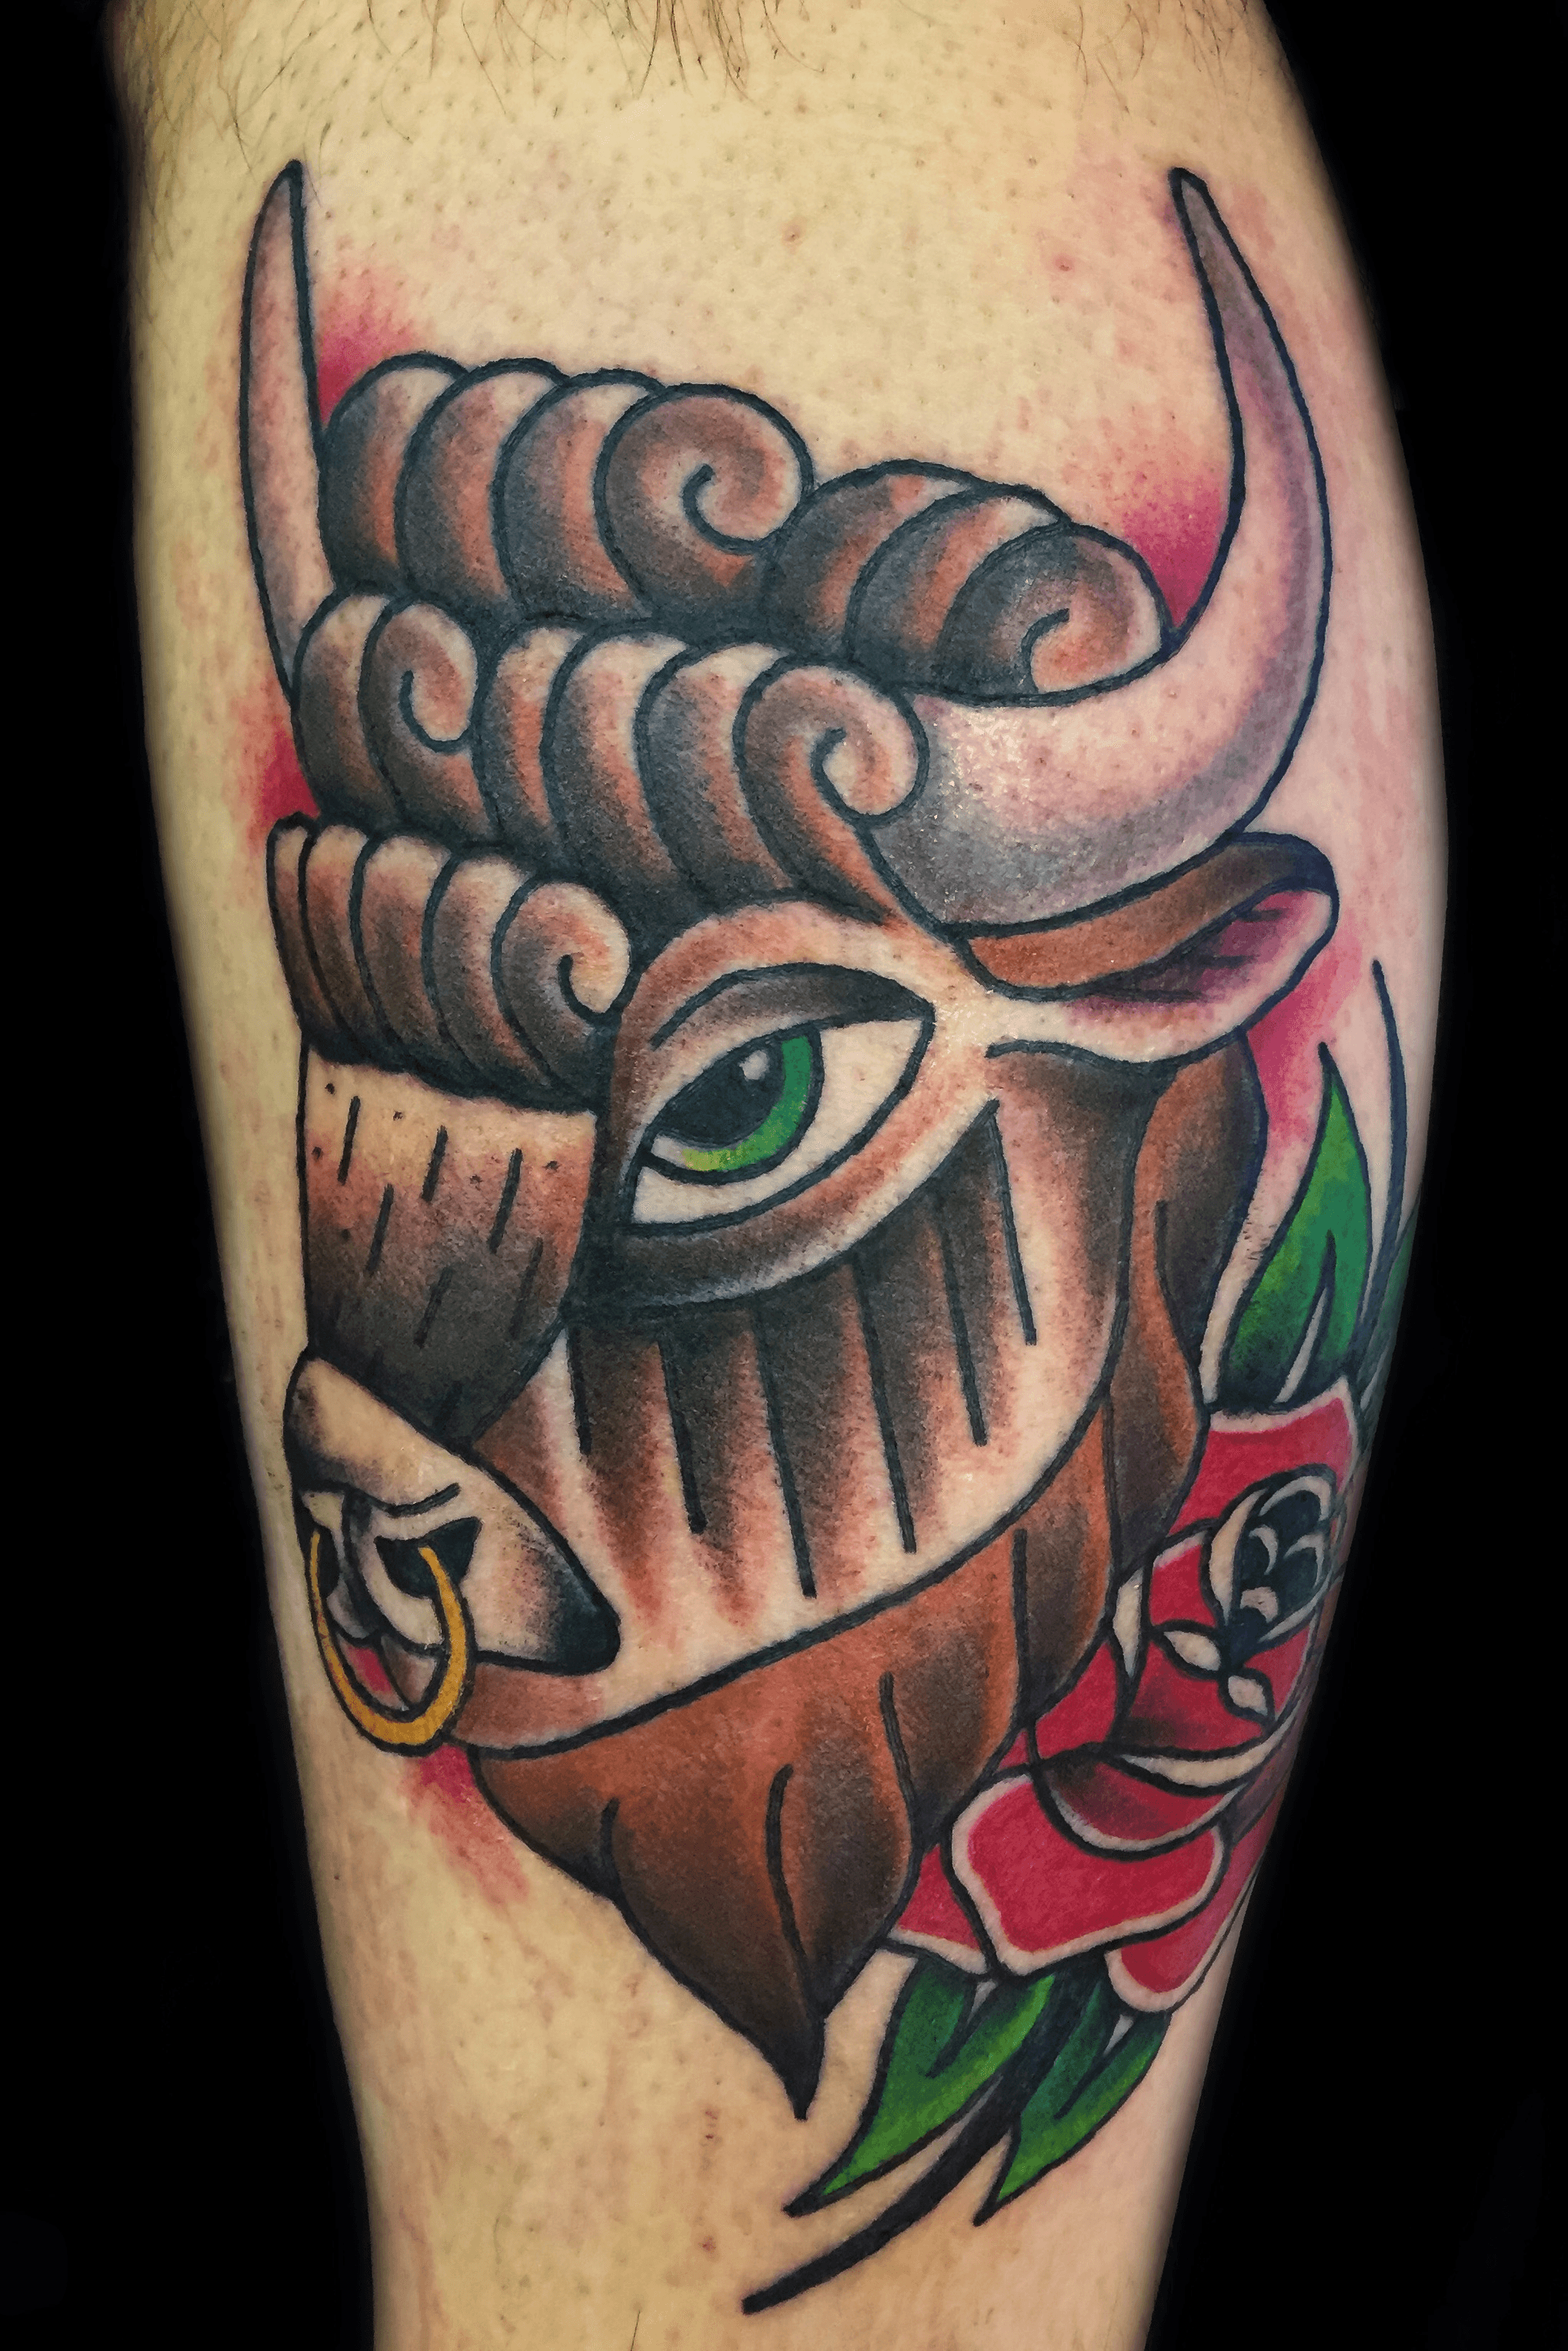 TwoHeaded Cow Tattoo On A Thigh by localbirdmom  Tattoogridnet